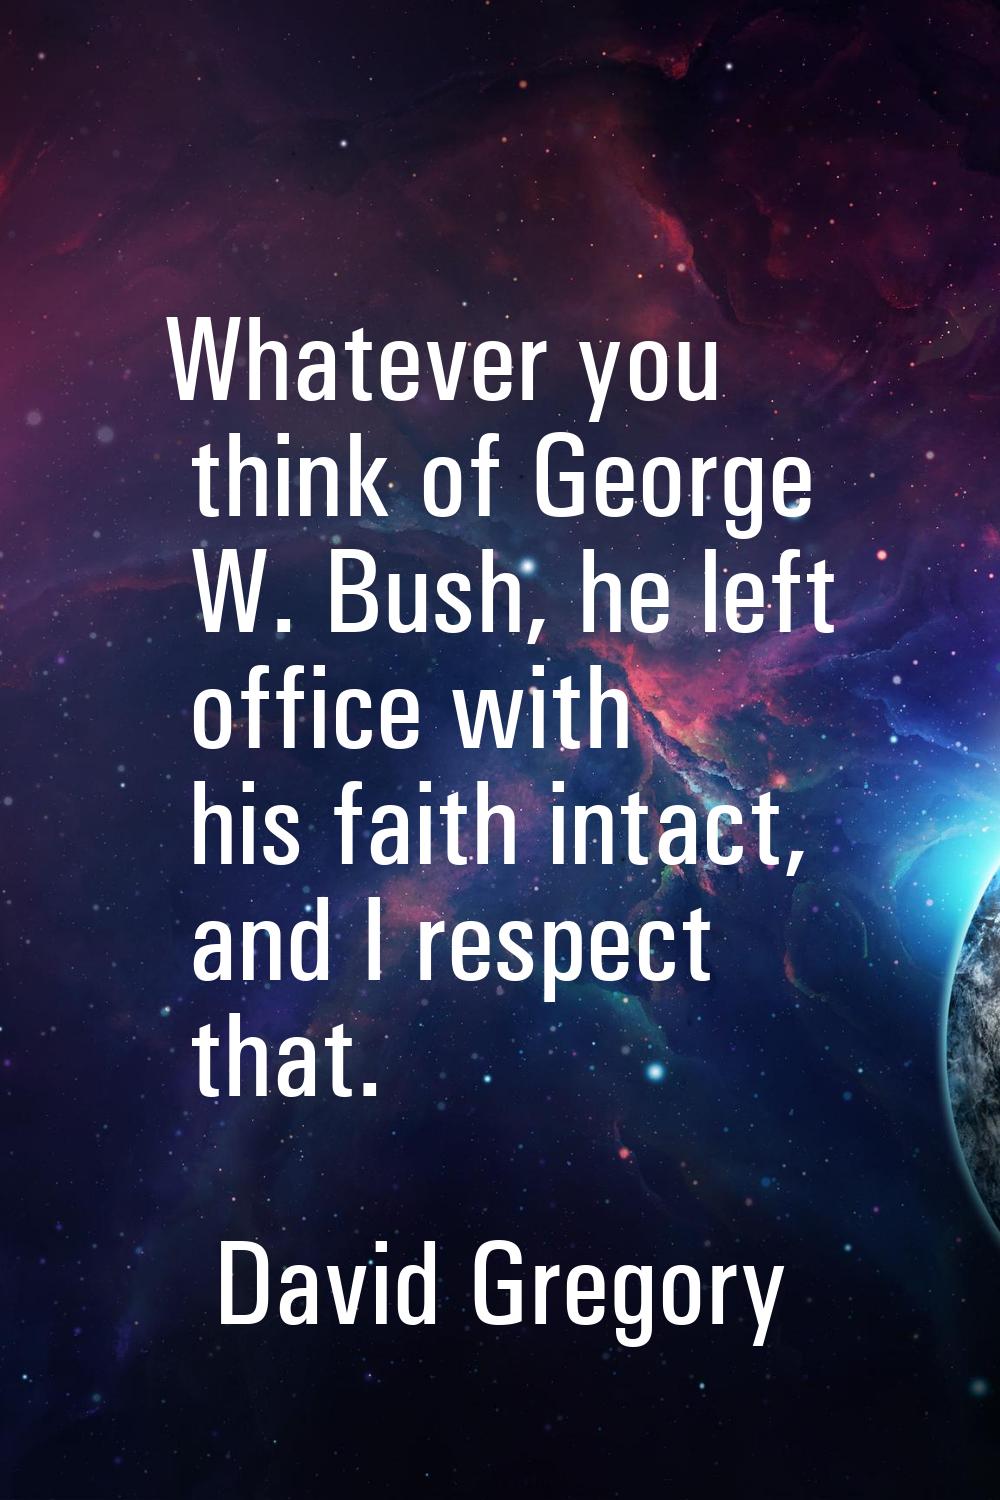 Whatever you think of George W. Bush, he left office with his faith intact, and I respect that.